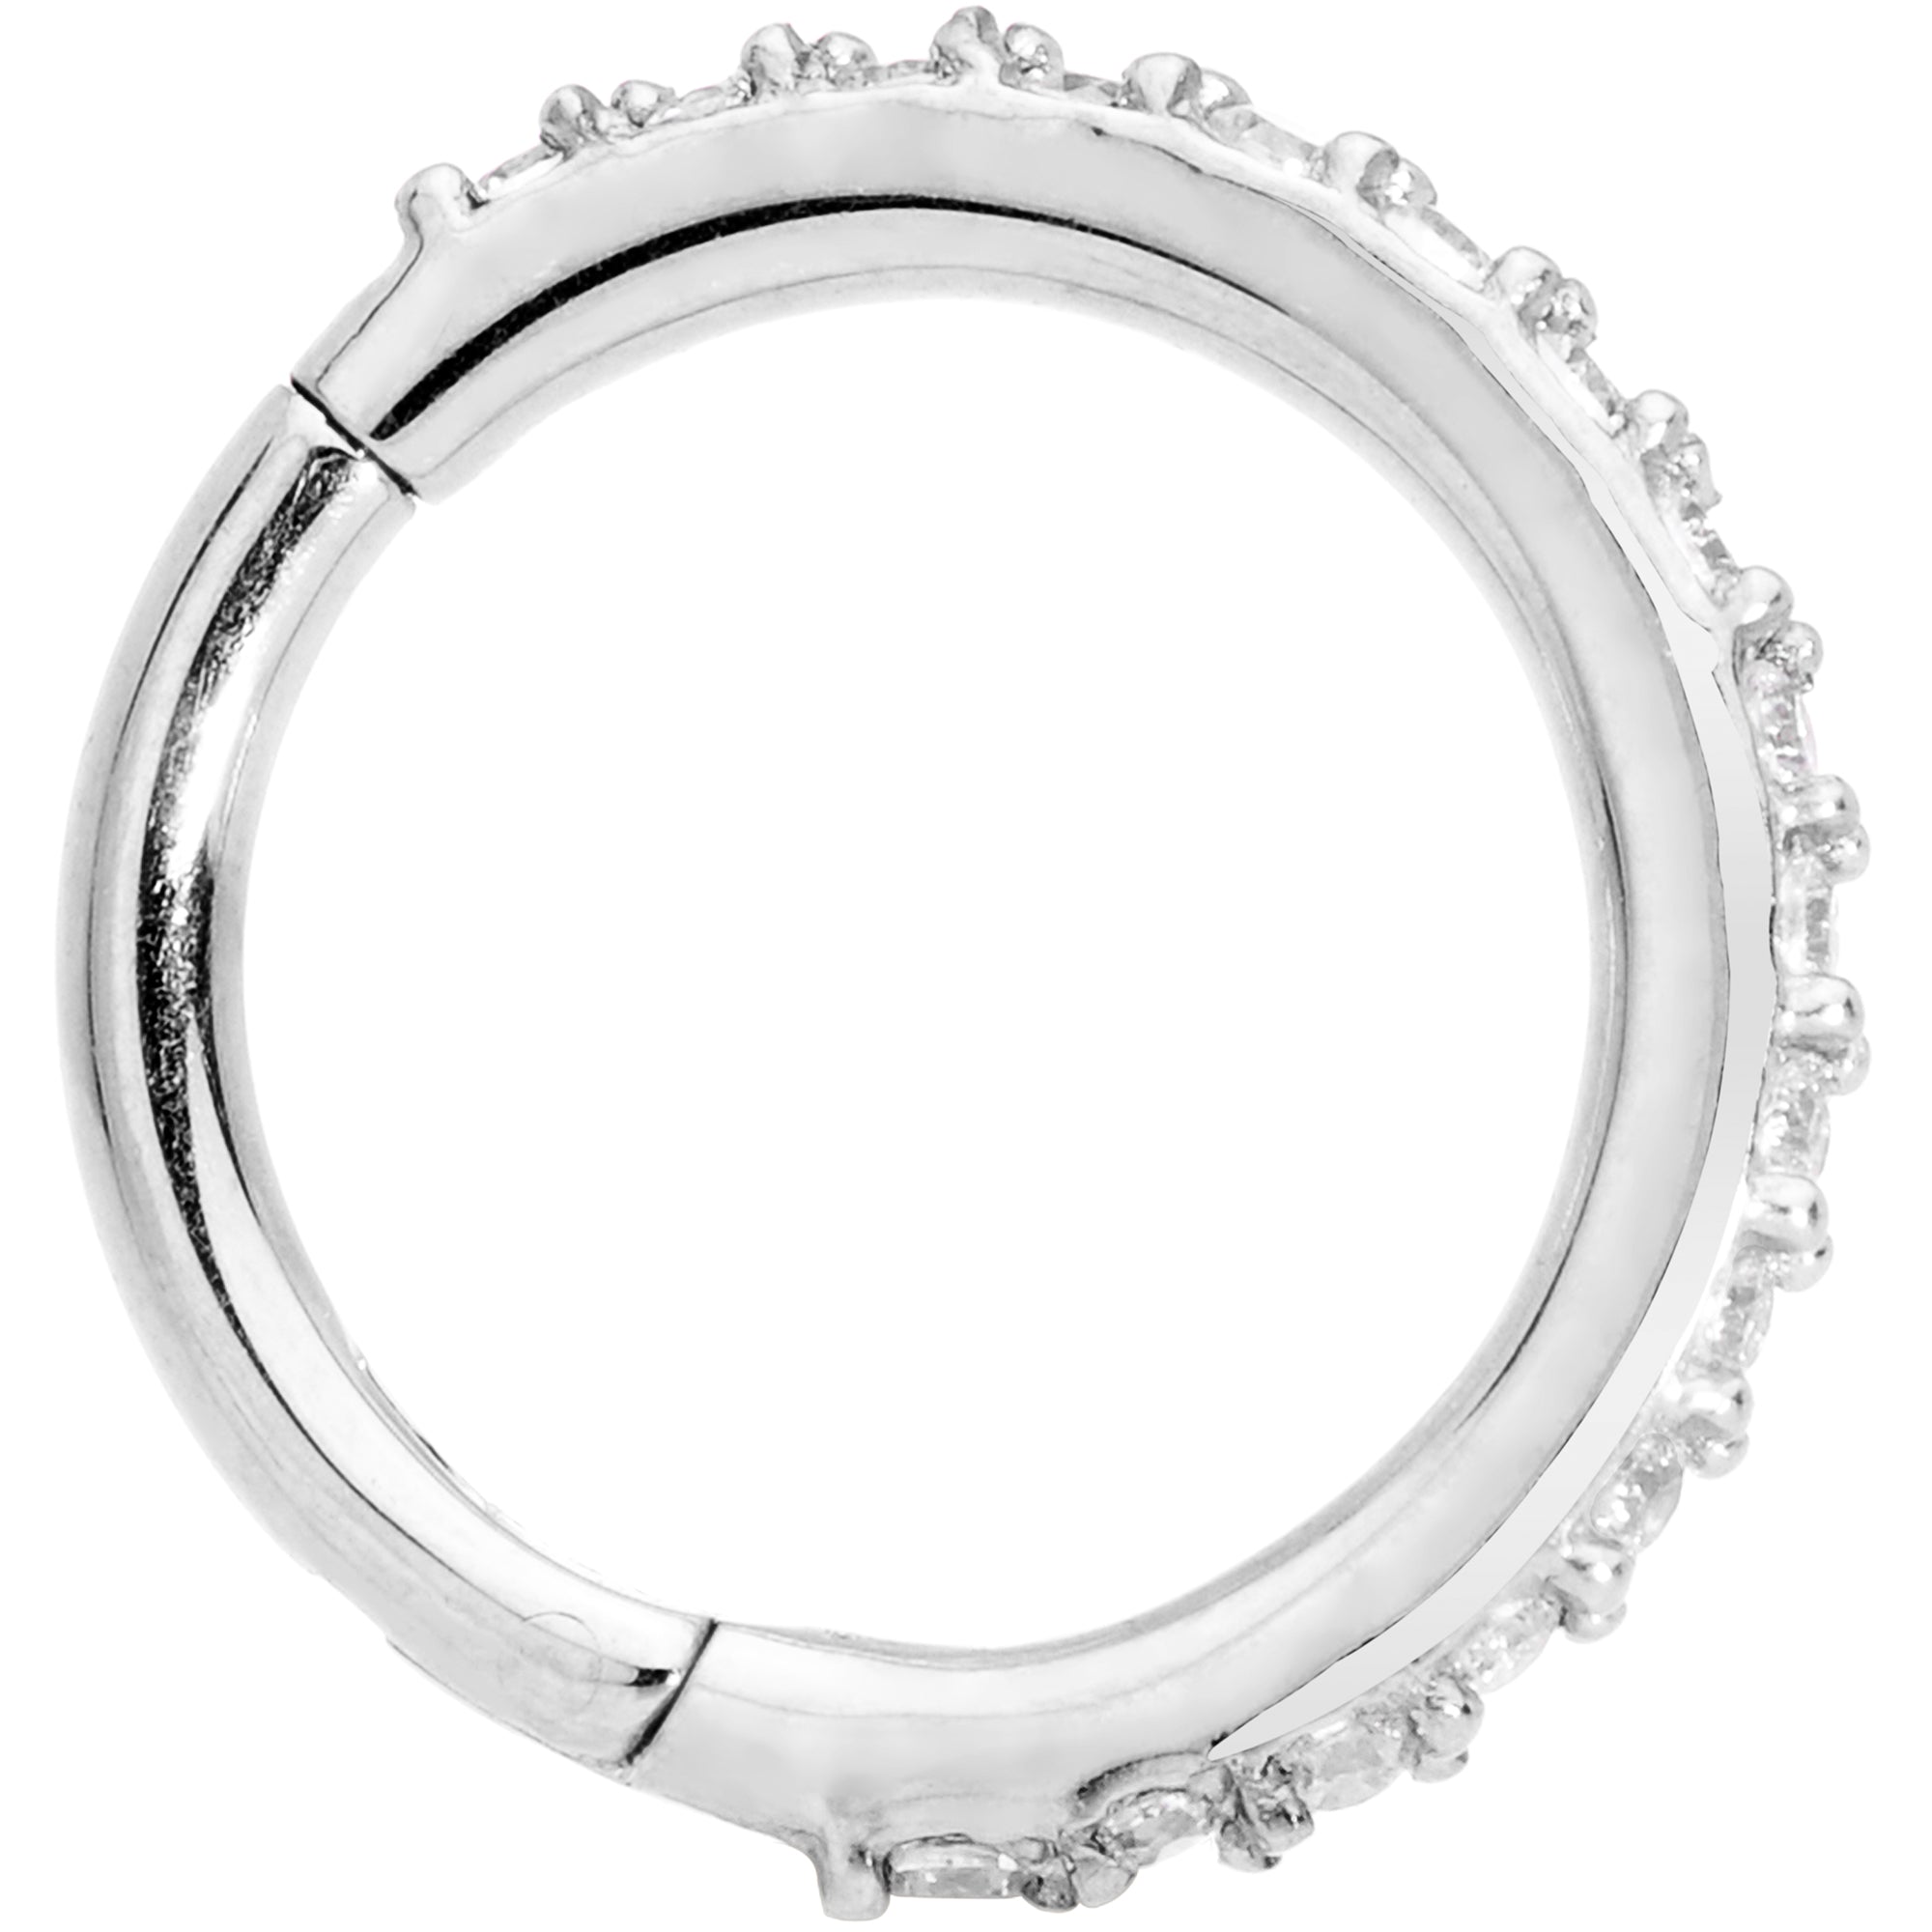 16 Gauge 5/16 Clear CZ Gem Stainless Steel Hinged Segment Ring